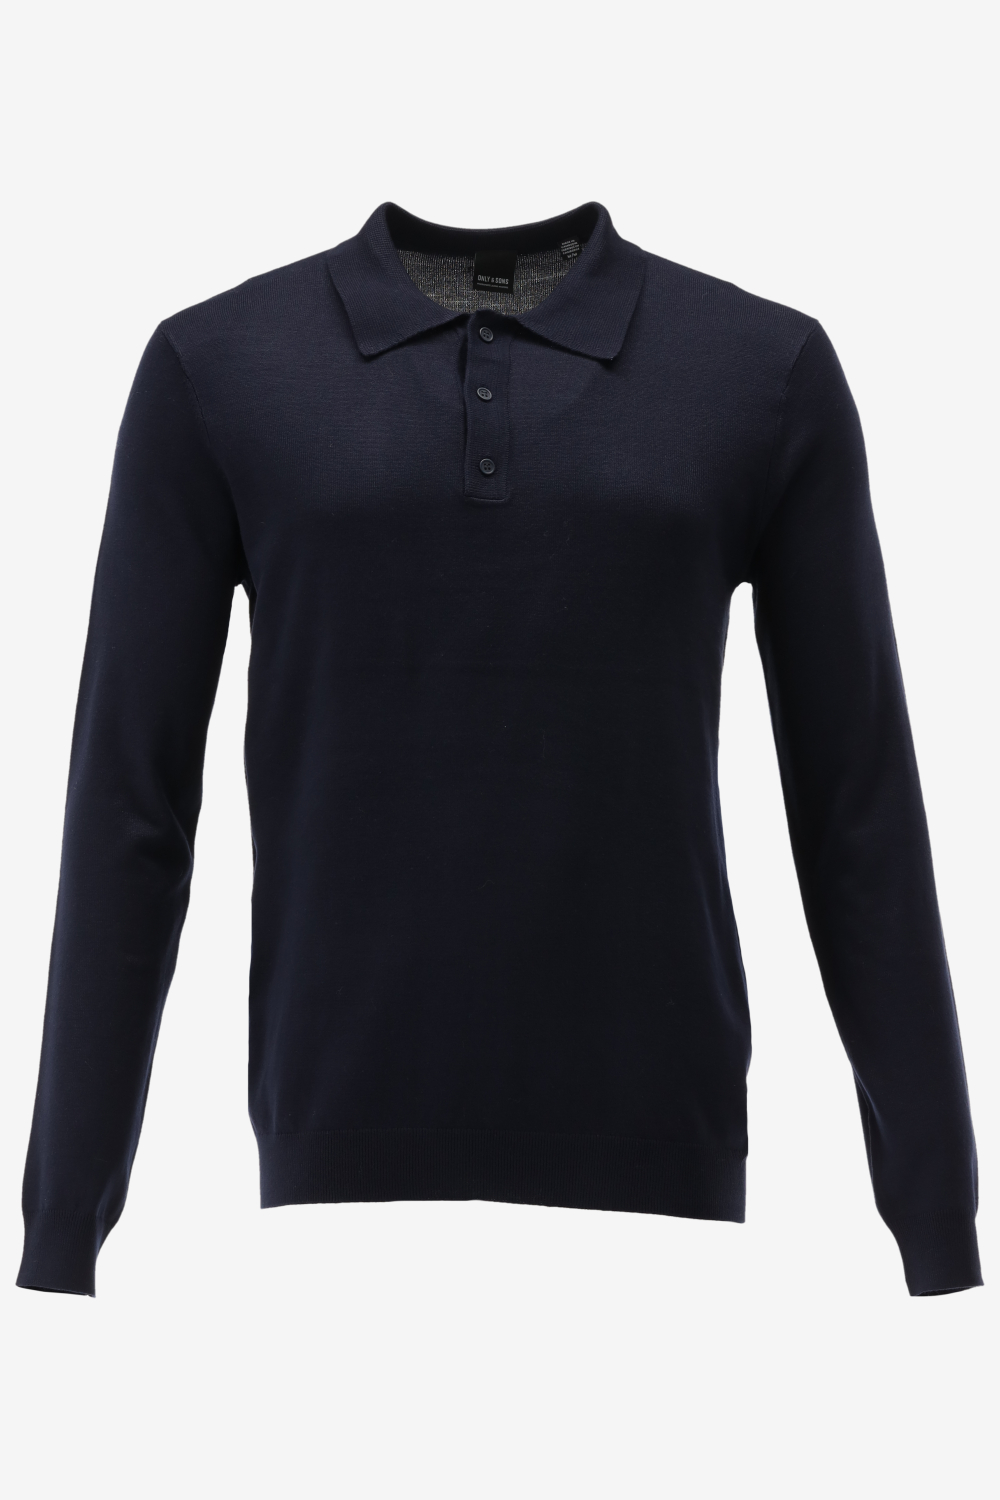 ONLY & SONS ONSWYLER LIFE REG 14 LS POLO KNIT Heren Trui - Maat S